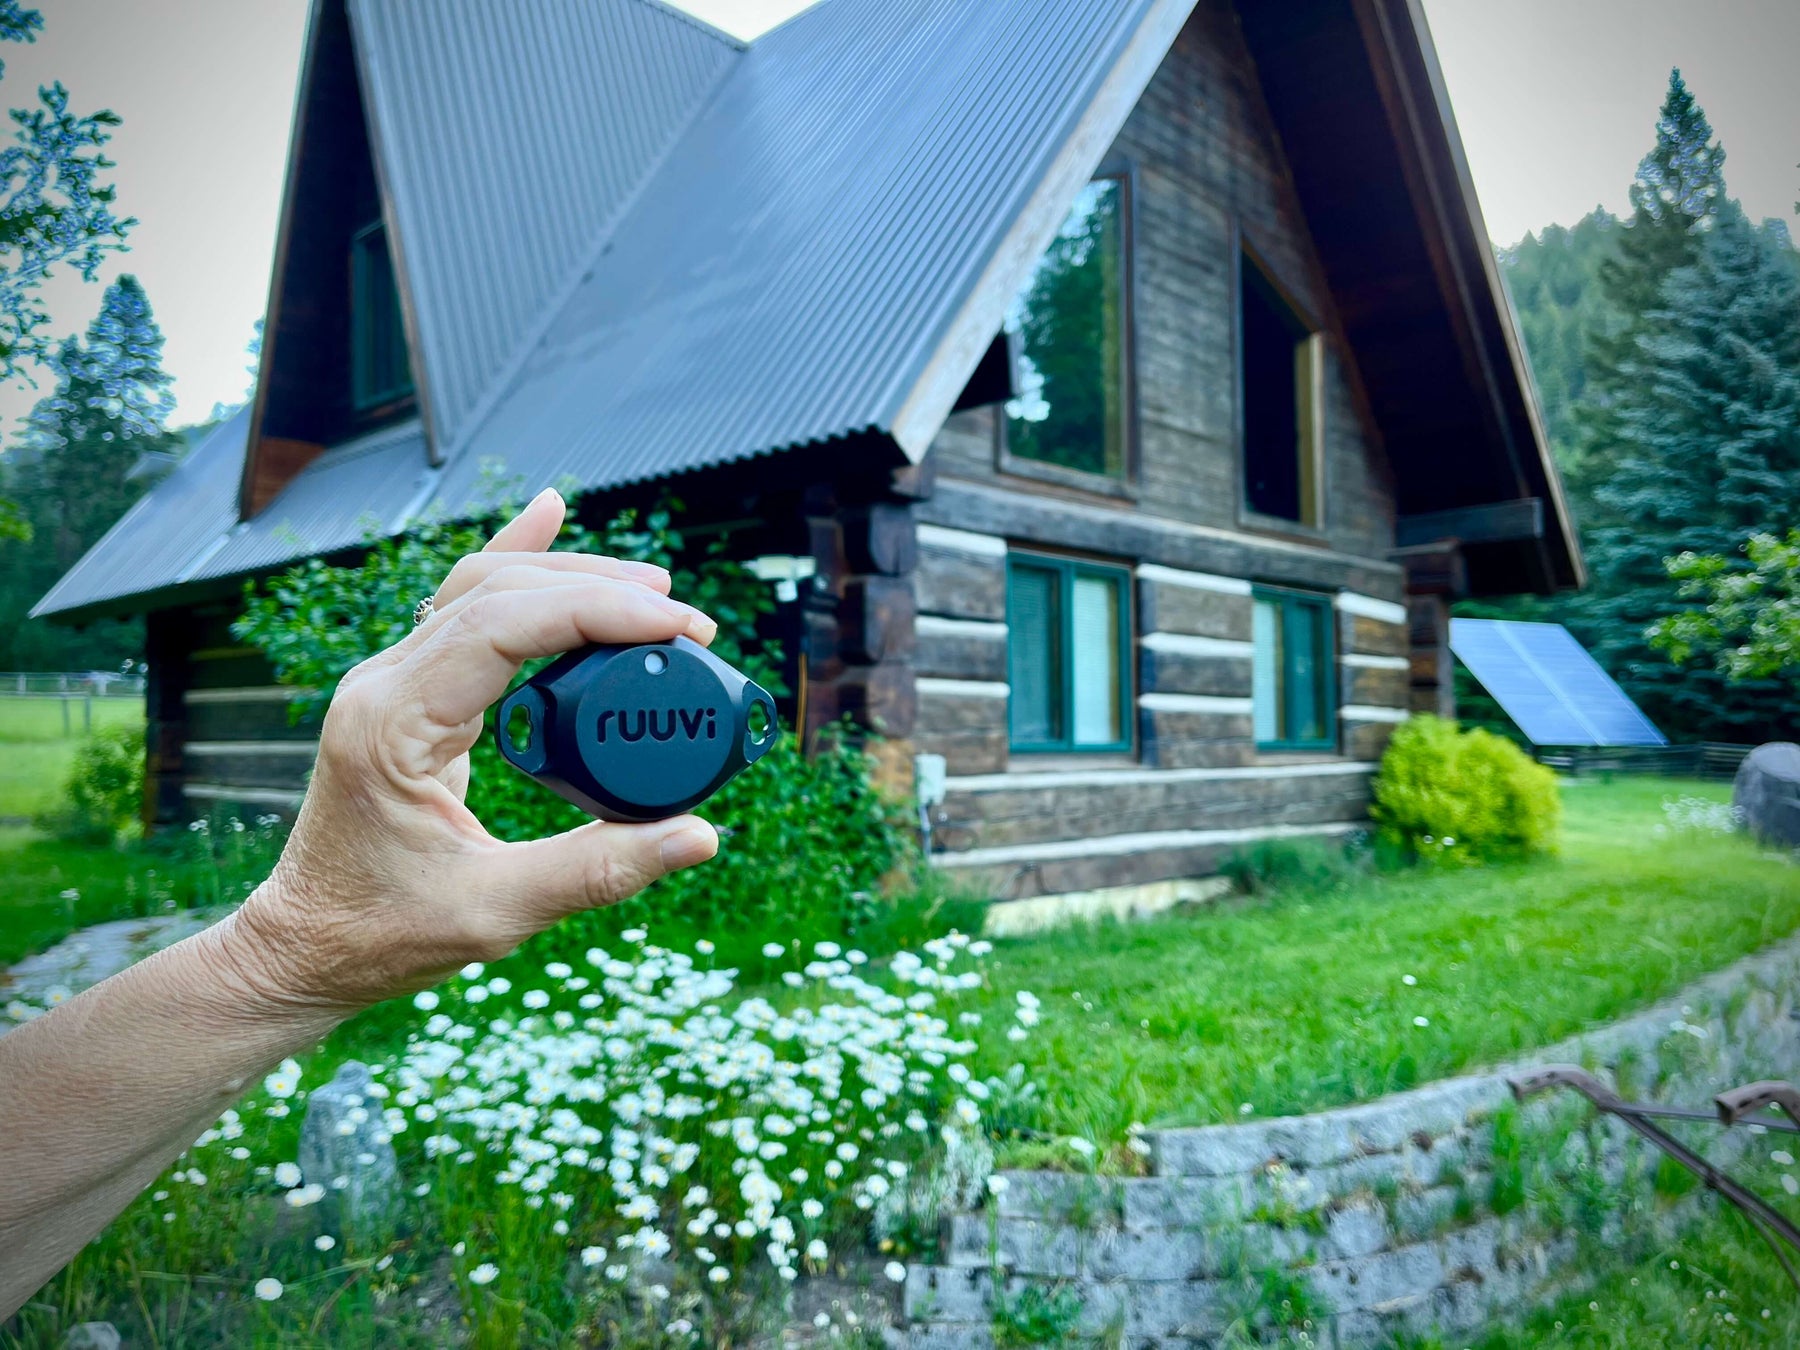 5 Ruuvi Sensors, 5 Problems Solved for an Off-grid Cabin Homeowner